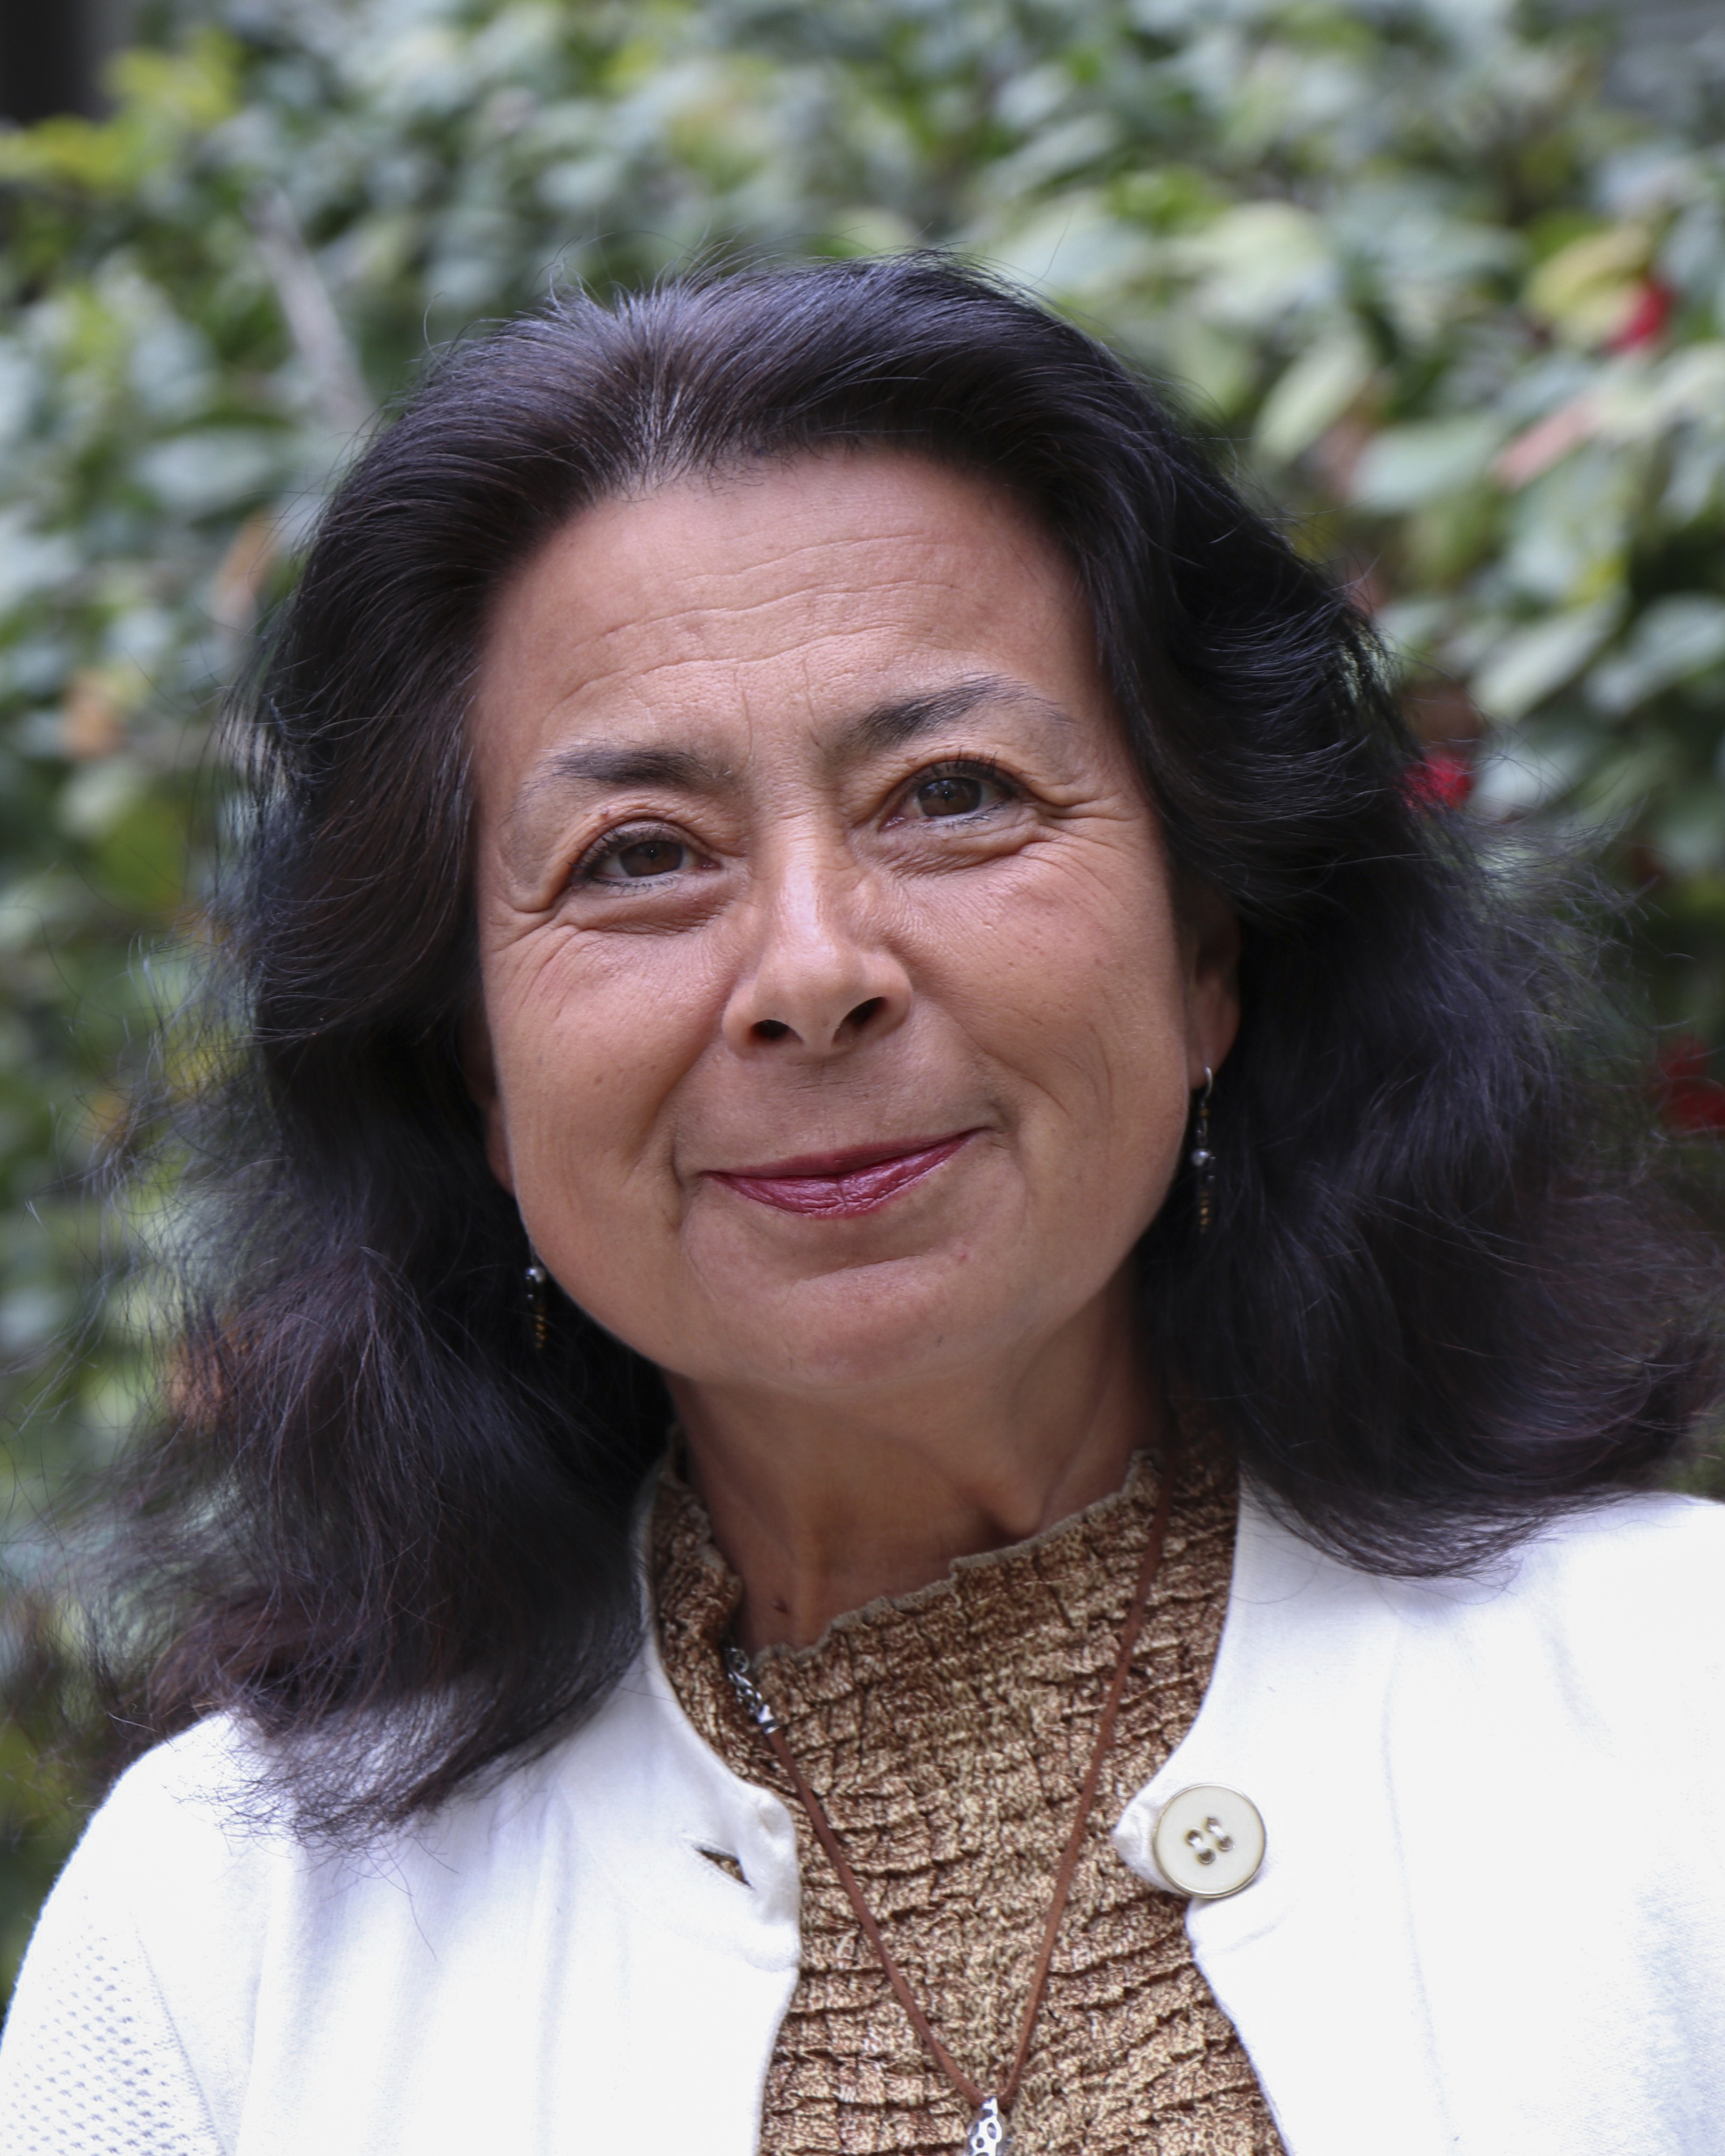 Headshot of Dr. Rose Borunda. Dr. Borunda stands in front of a dark green bush with red flowers. Dr. Borunda smiles wearing a white cardigan and bown top